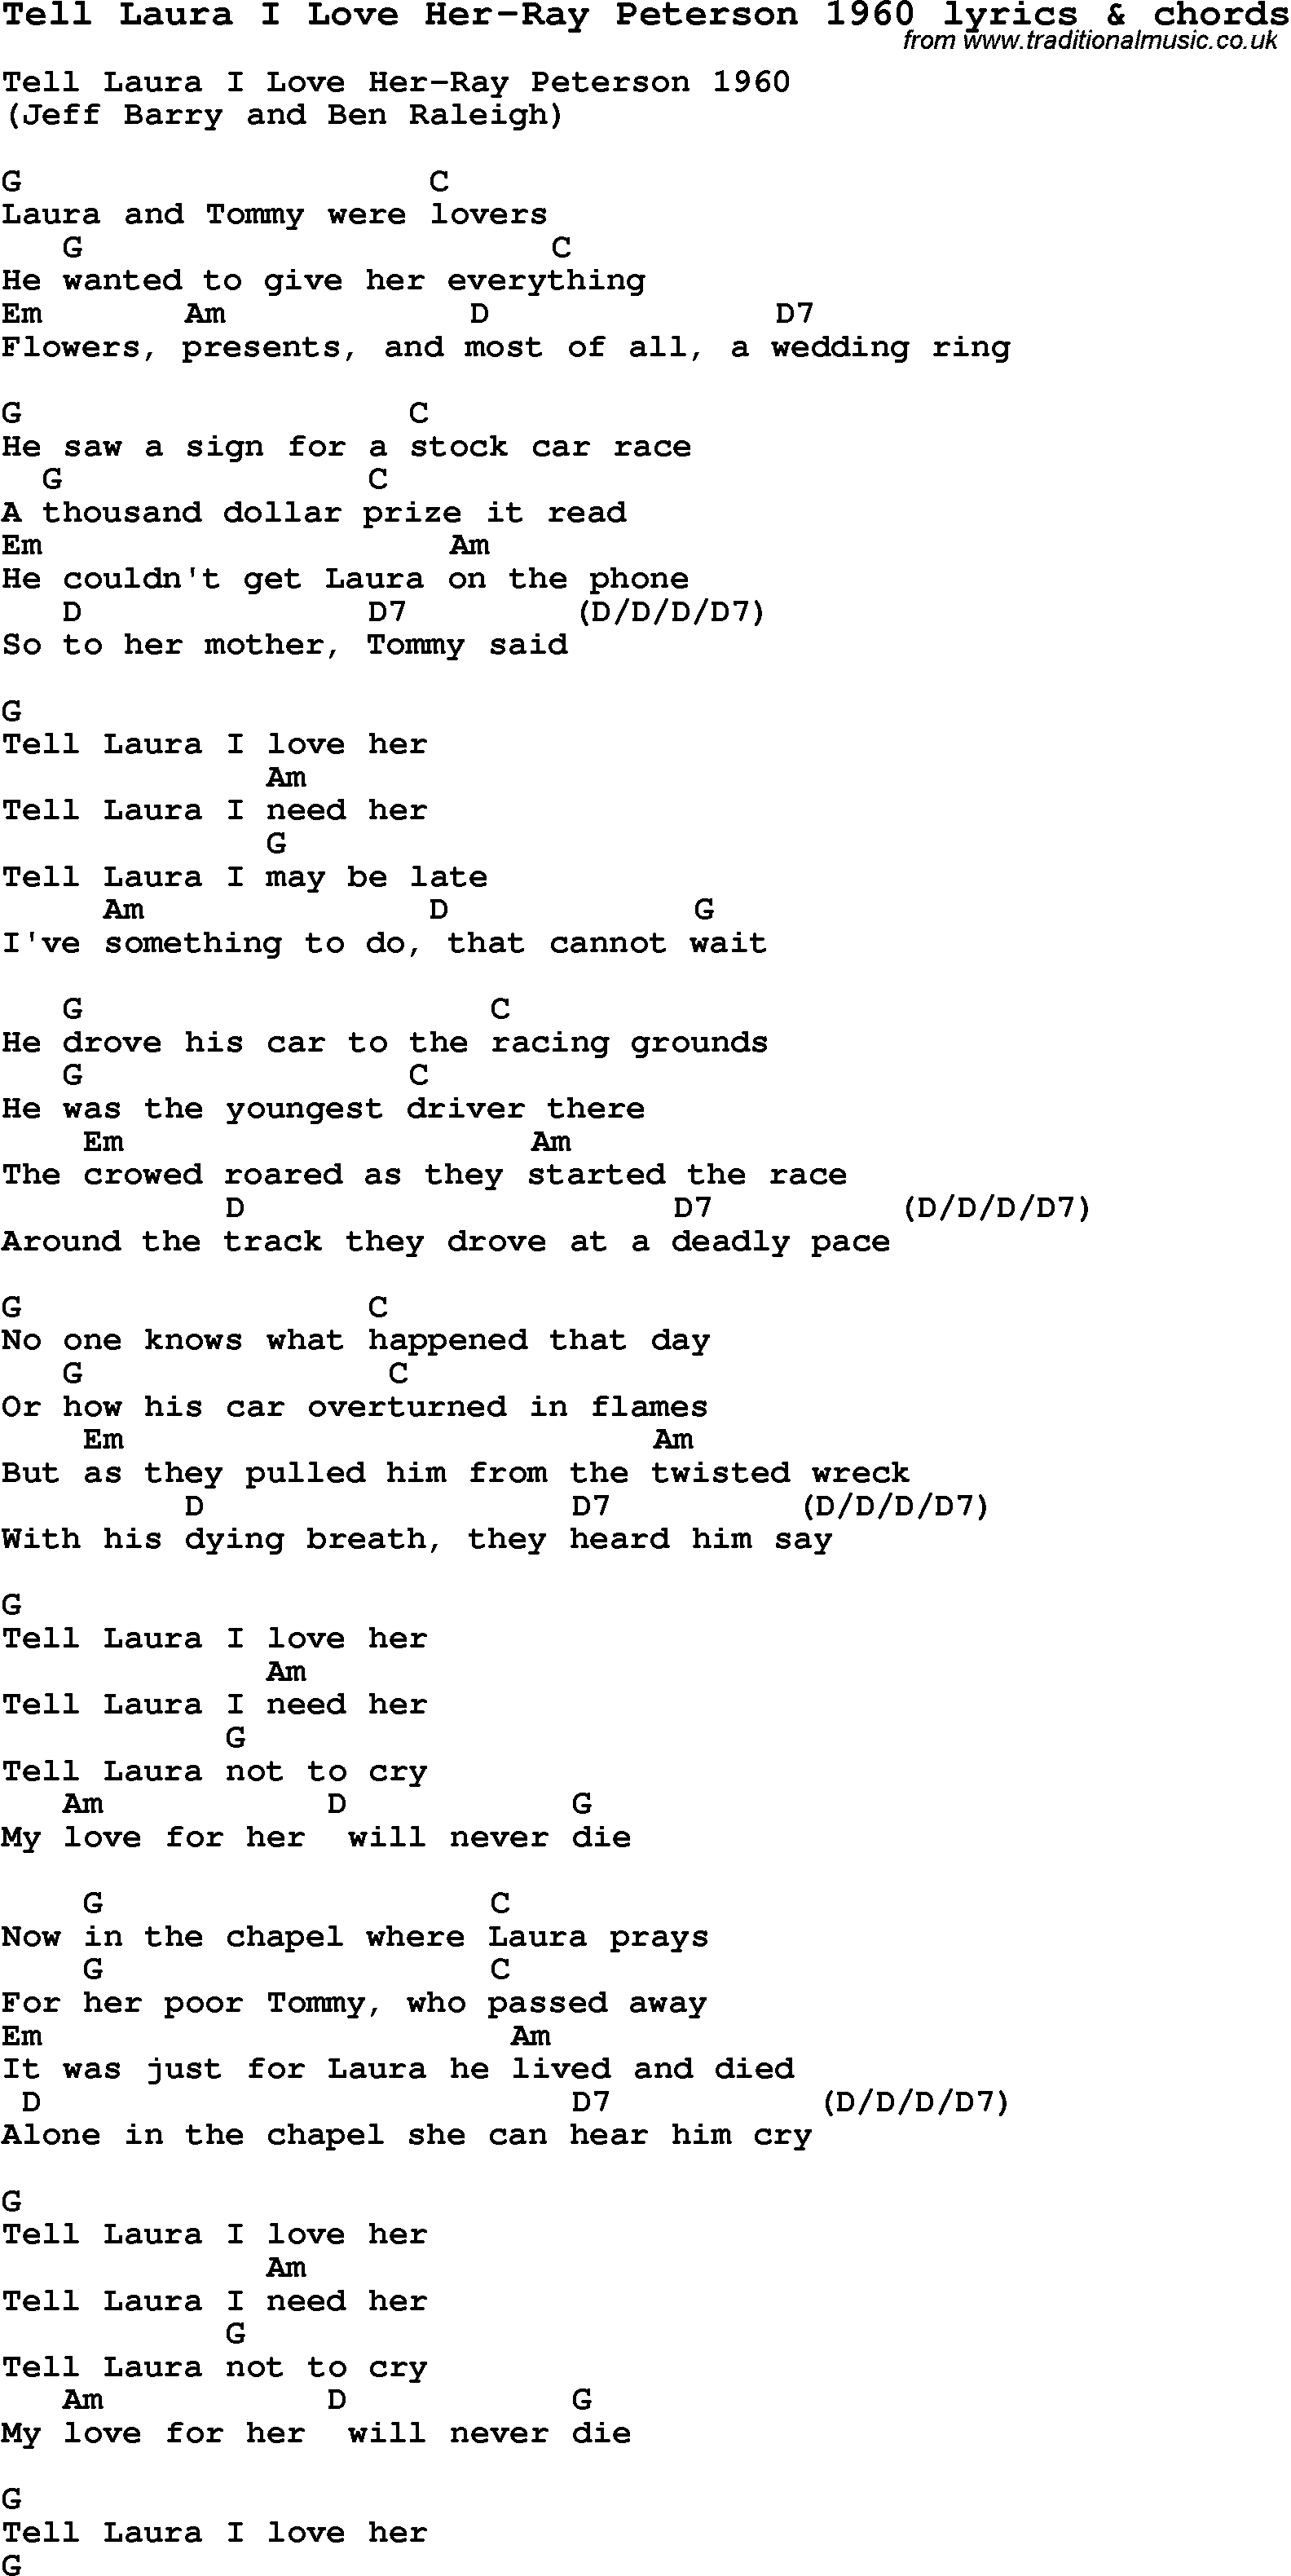 Love Song Lyrics for: Tell Laura I Love Her-Ray Peterson 1960 with chords for Ukulele, Guitar Banjo etc.